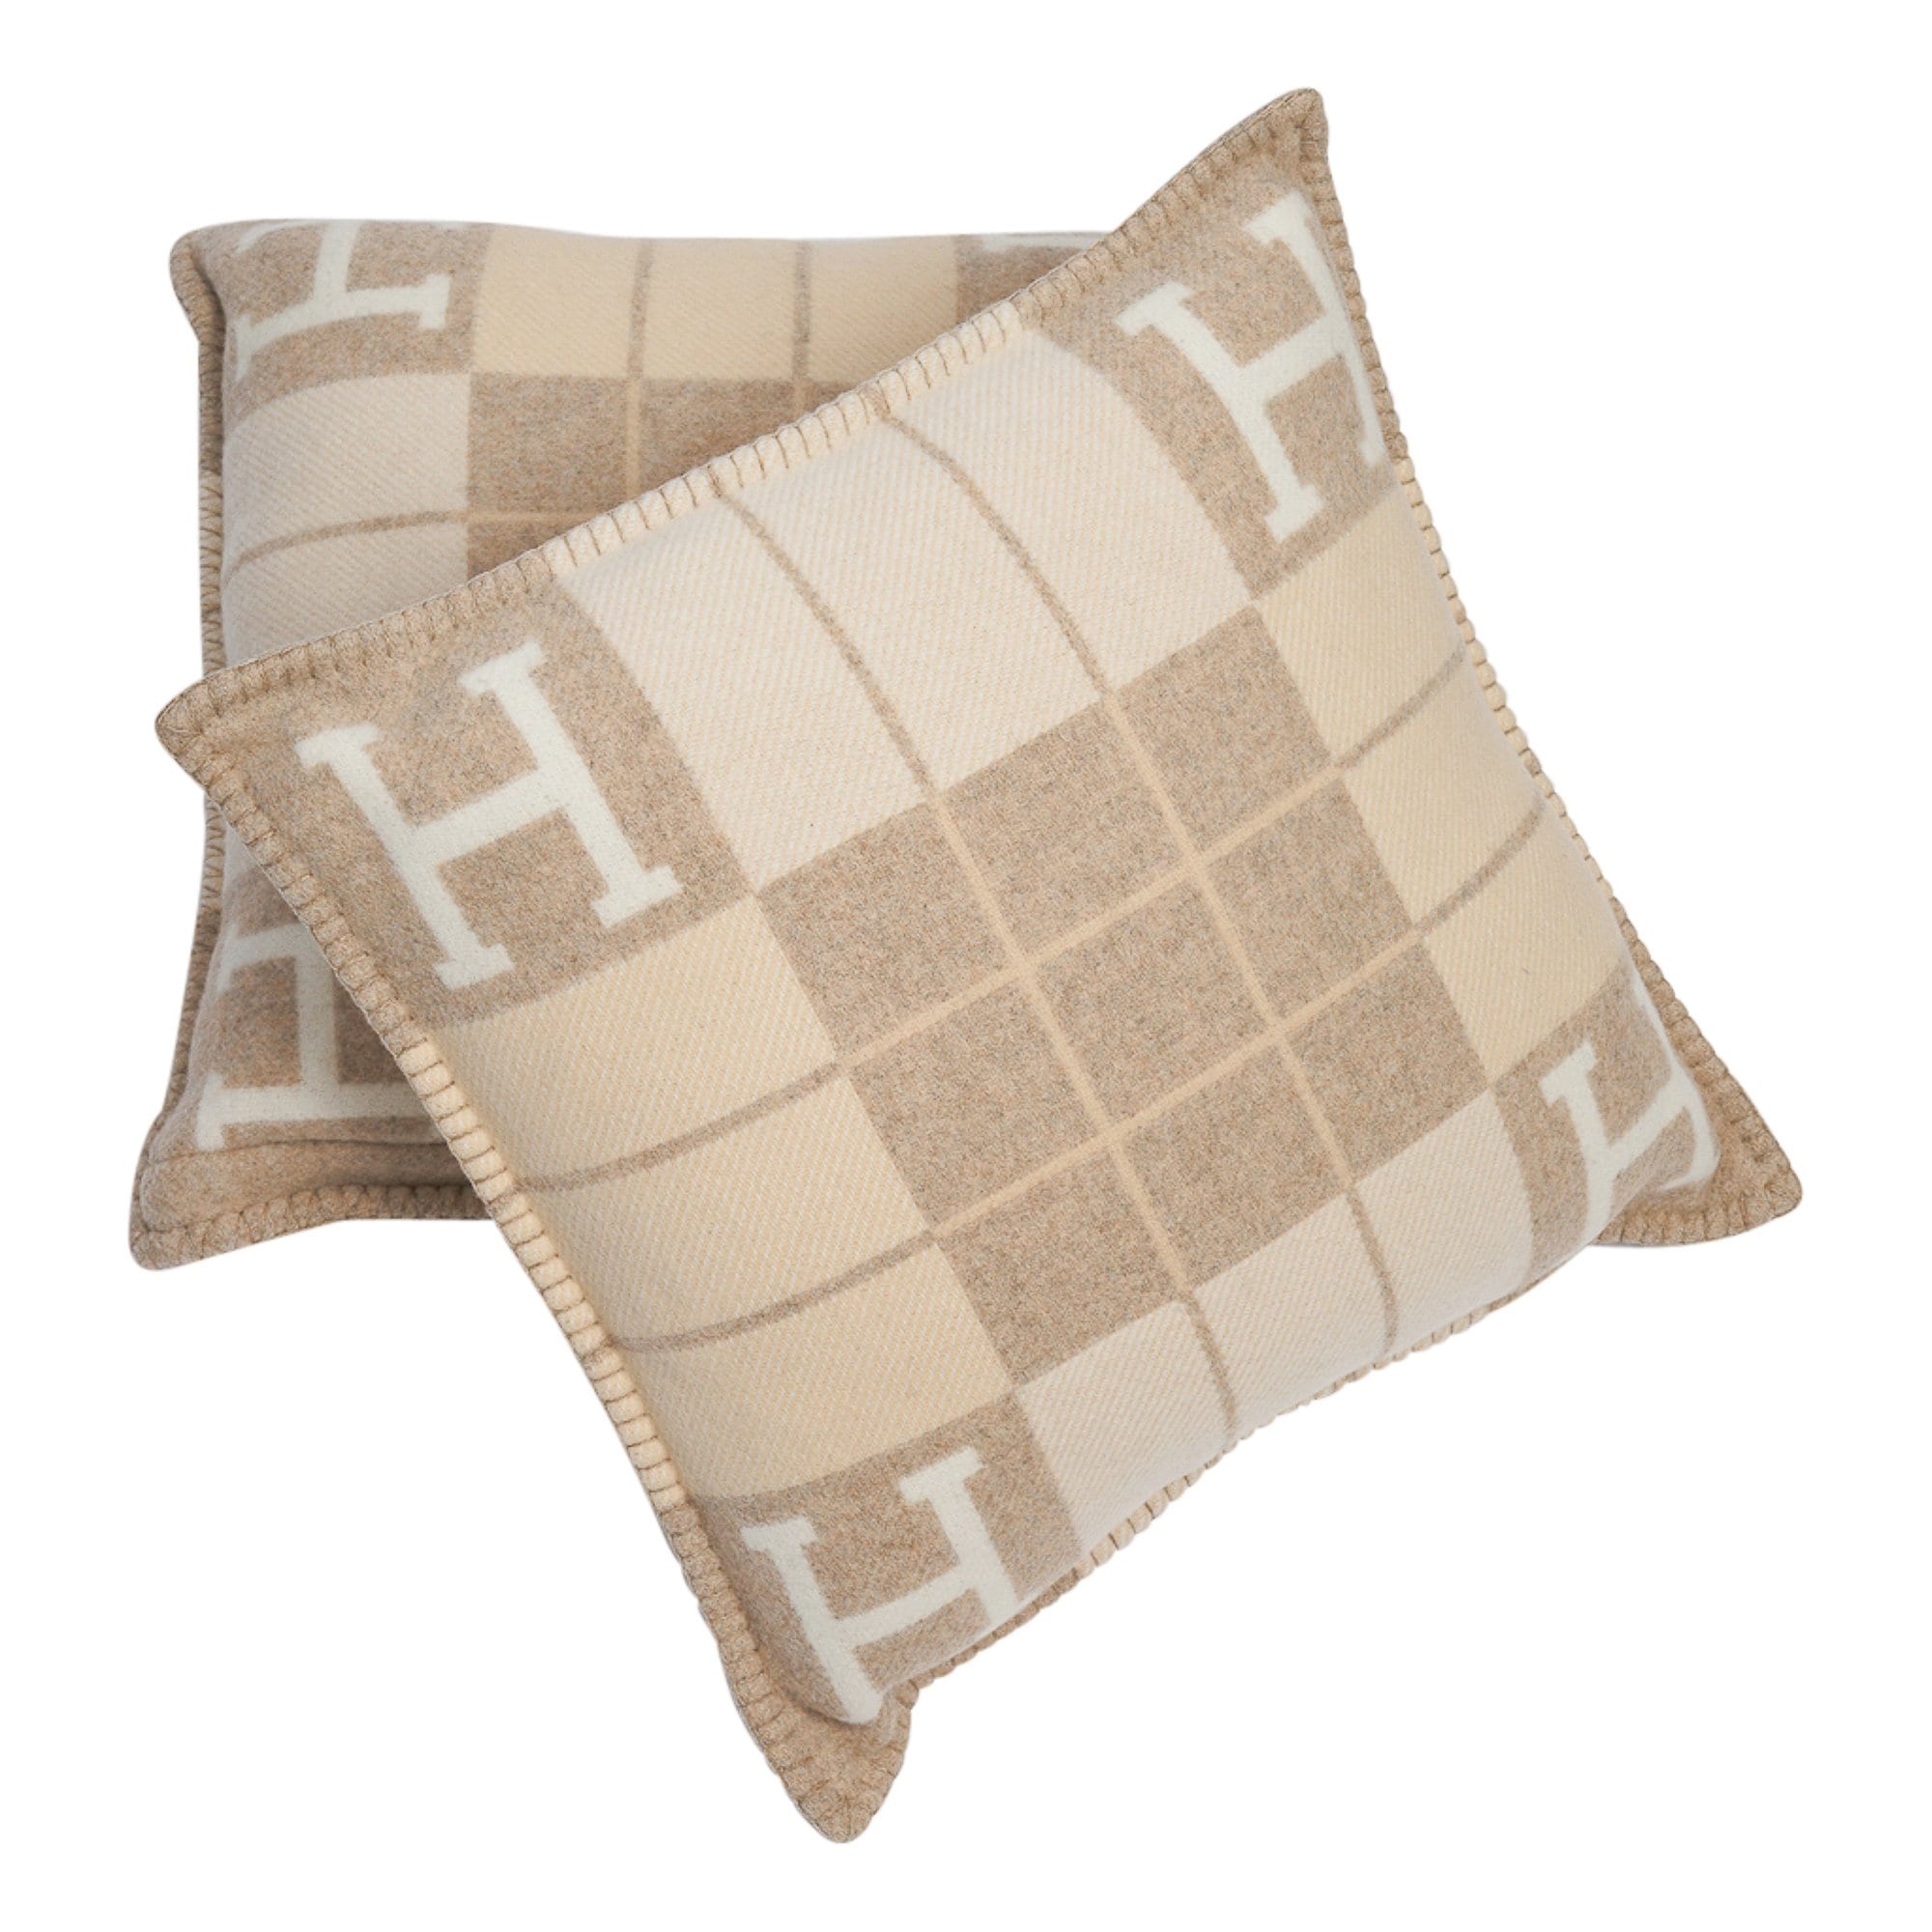 Hermes Cushion Avalon III PM H Camomille / Coco Throw Pillow Set of 2